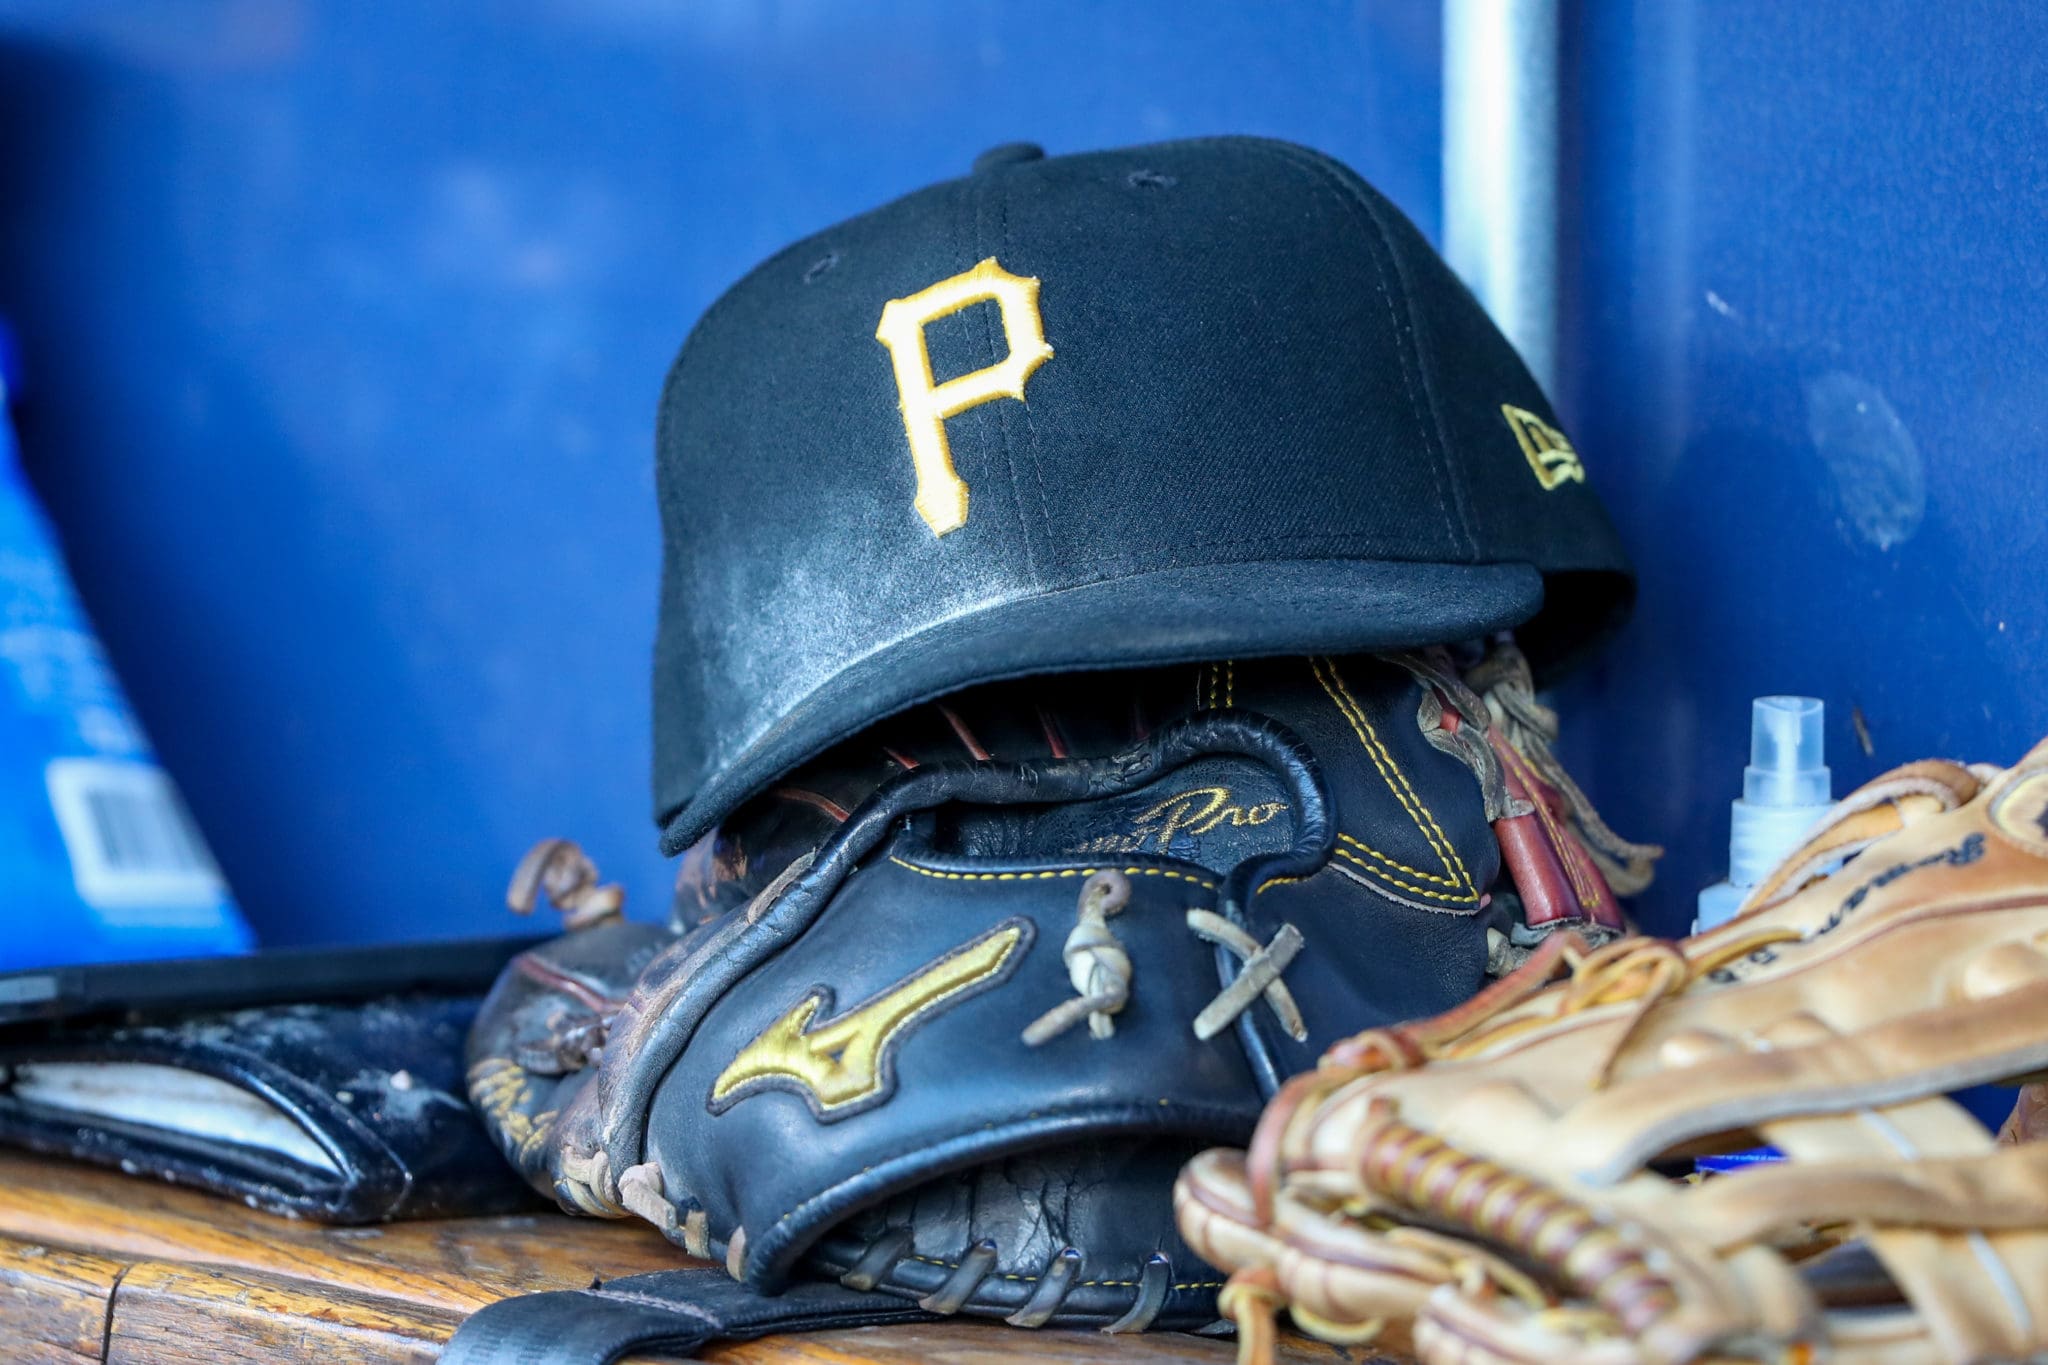 Pittsburgh Pirates: Middle Infield Options for 2022 Season